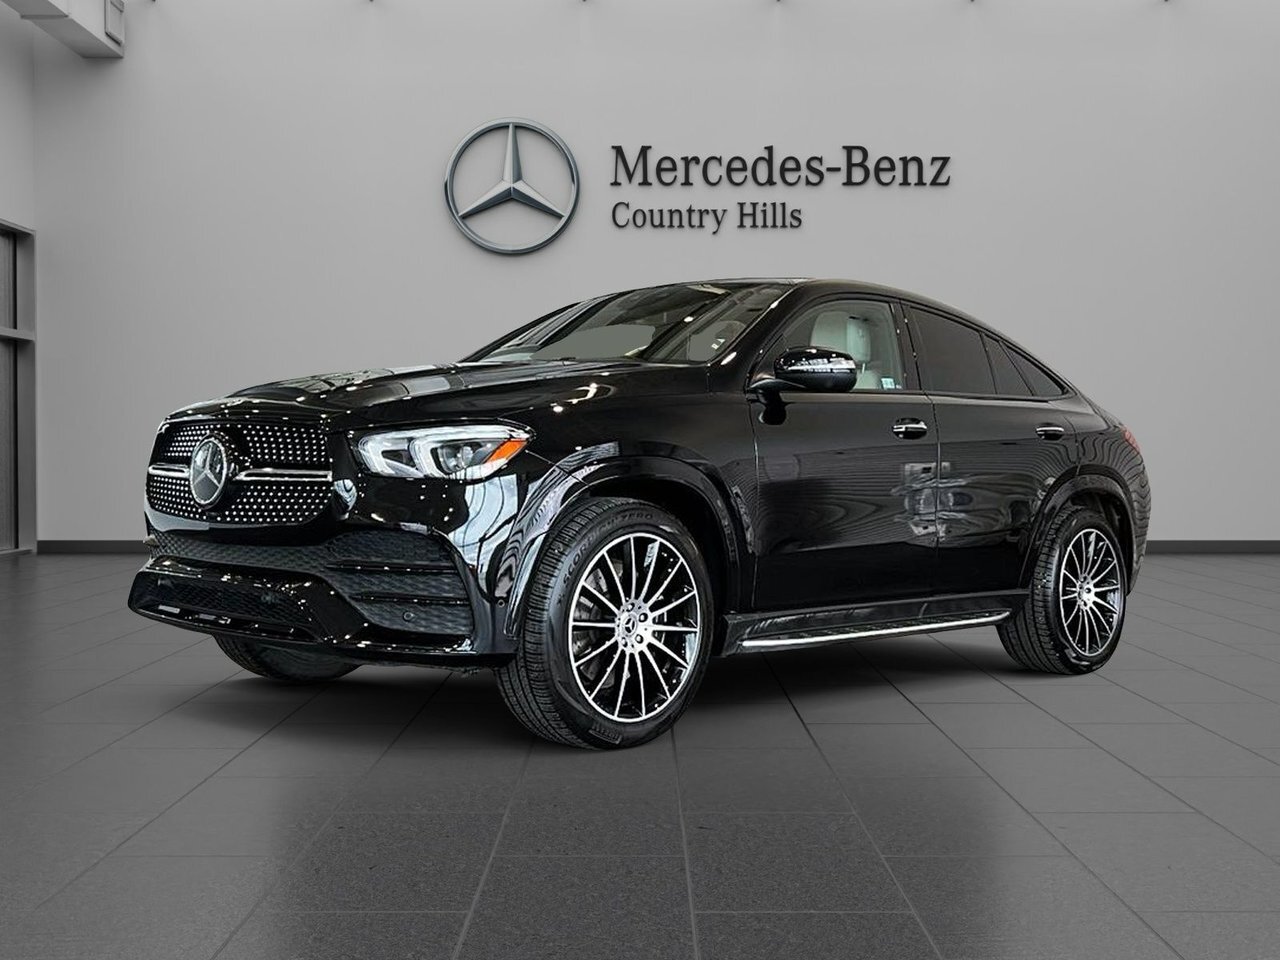 2022 Mercedes-Benz GLE450 4MATIC Coupe Rare COUPE! Warranty until 2028!